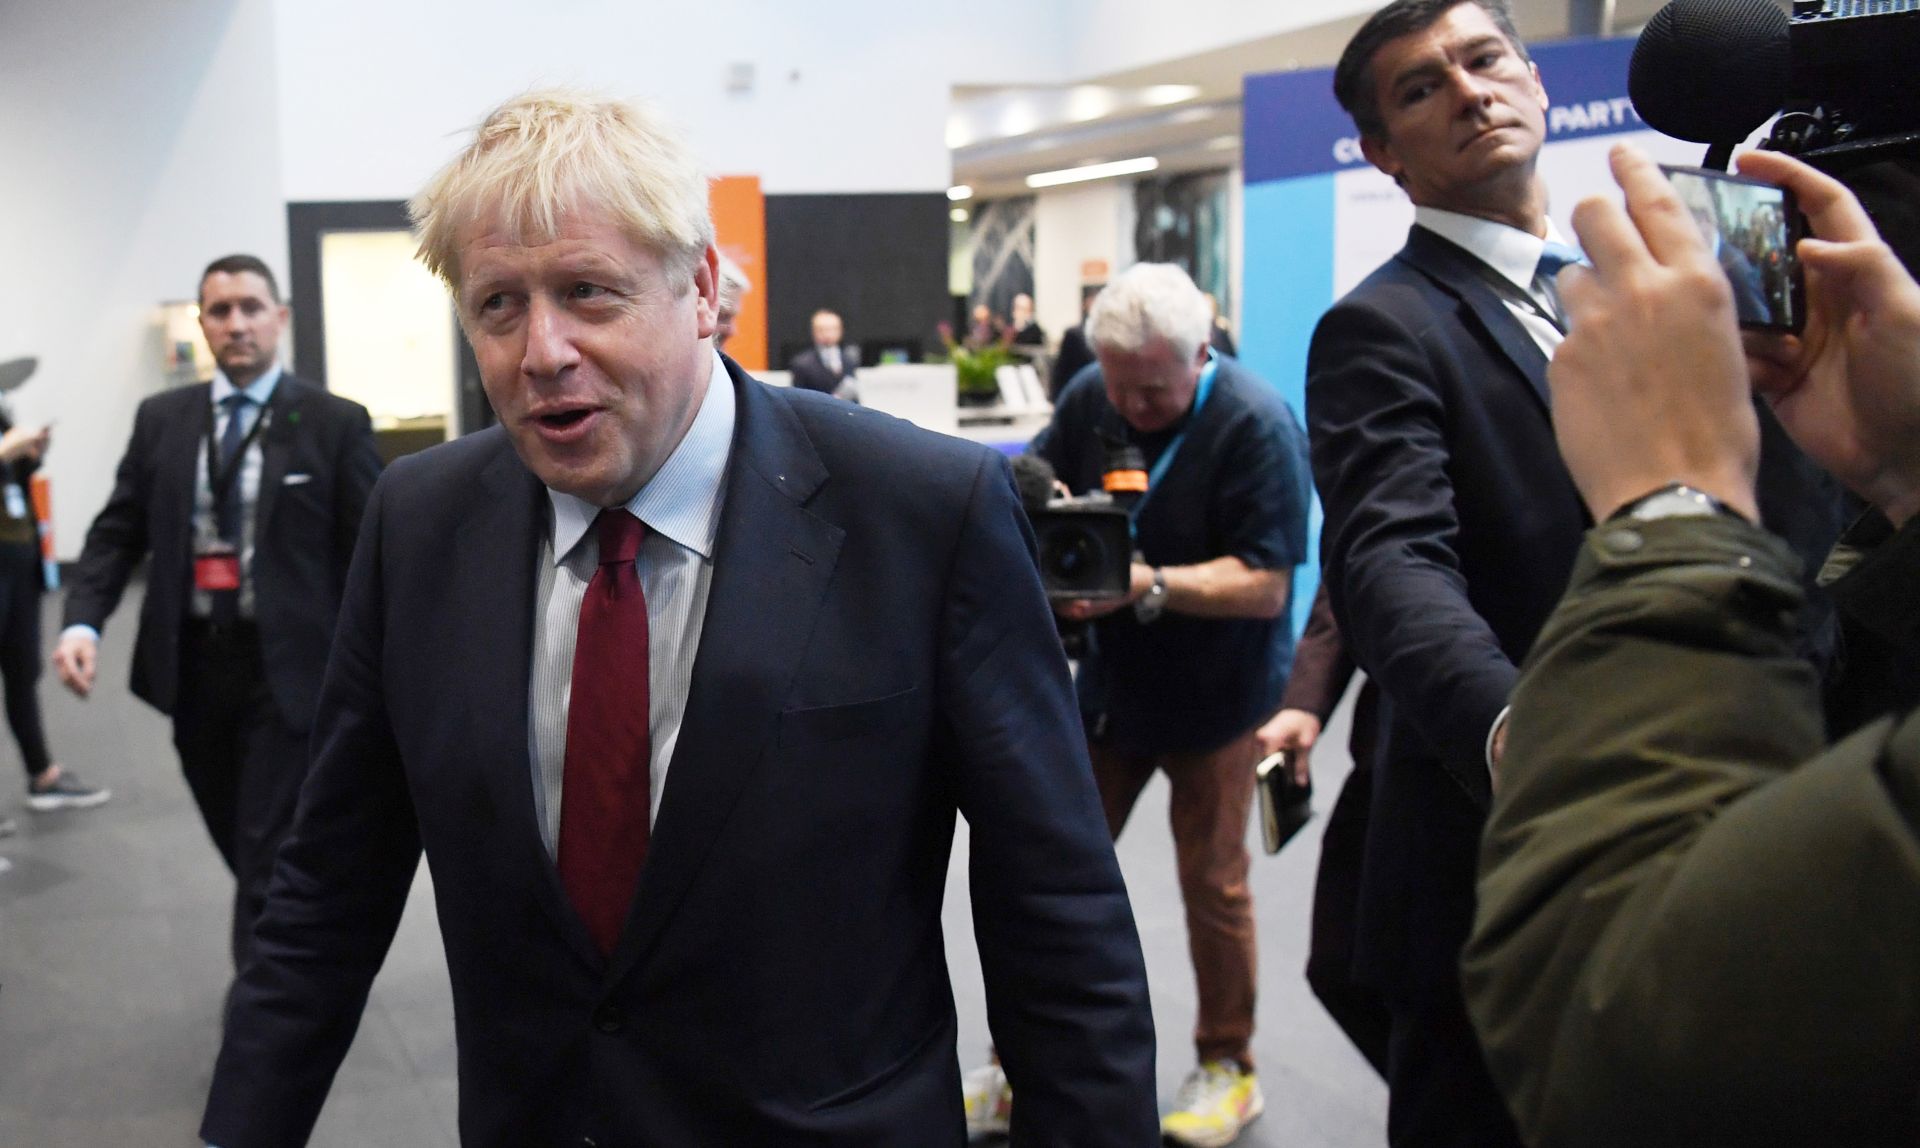 epa07884432 Britain's Prime Minister Boris Johnson arrives for media interviews at the Conservative Party Conference in Manchester, Britain, 01 October 2019. The Conservative Party Conference runs from 29 September to 02 October 2019.  EPA/NEIL HALL